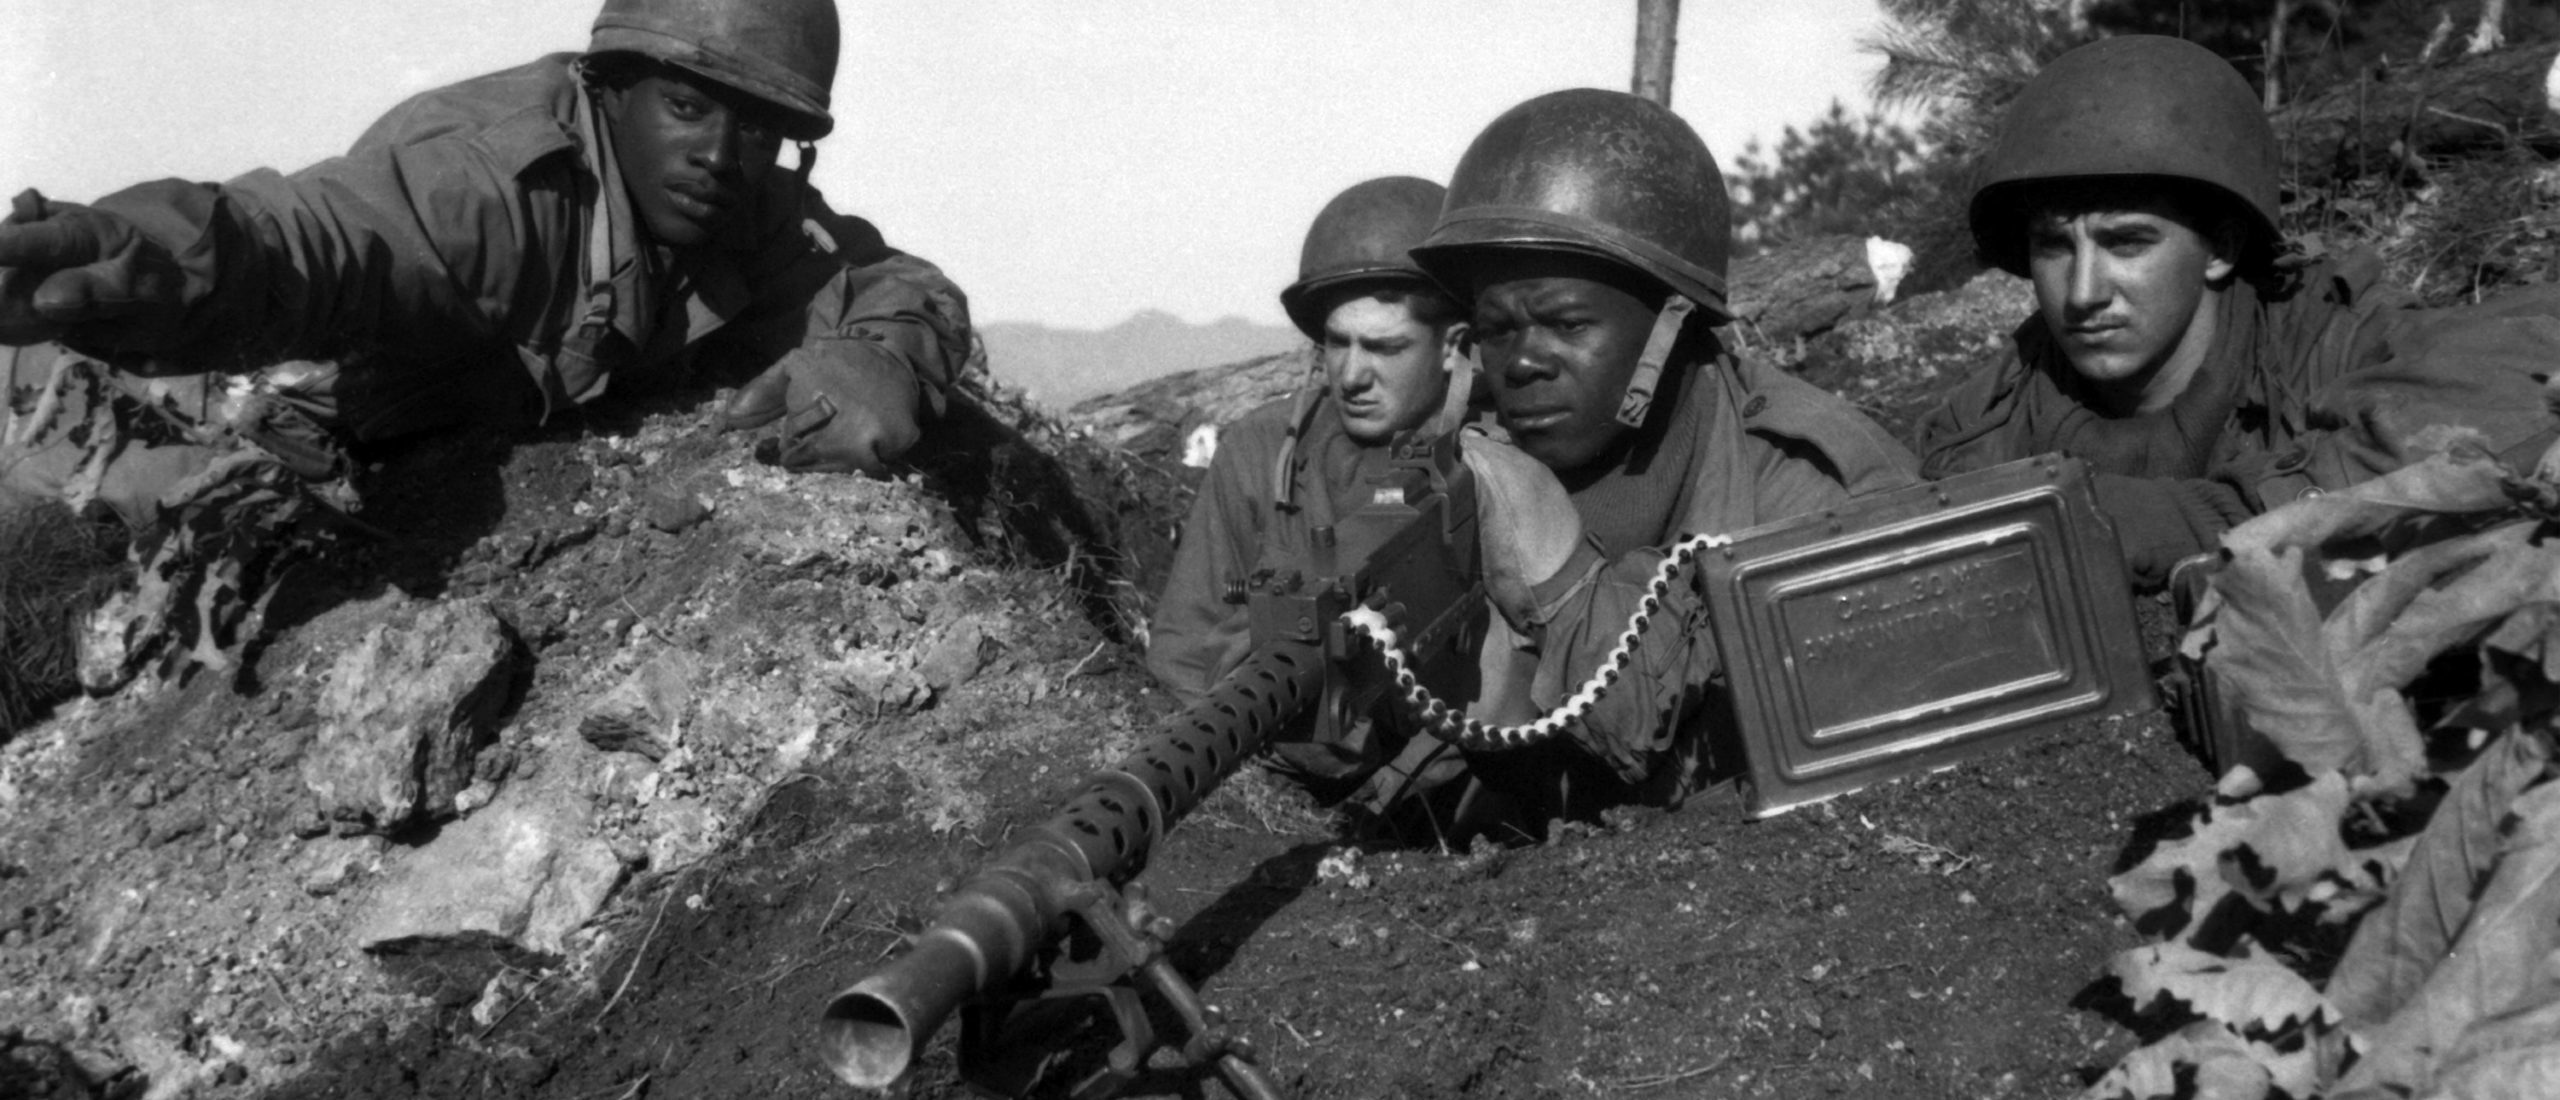 Fighting with the 2nd Infantry Division north of the Chongchon River, Sfc. Major Cleveland, points out a Communist-led North Korean position to his machine gun crew armed with a Browning M1919 machine gun on Nov. 20, 1950. [Photo courtesy of Pfc. James Cox.]